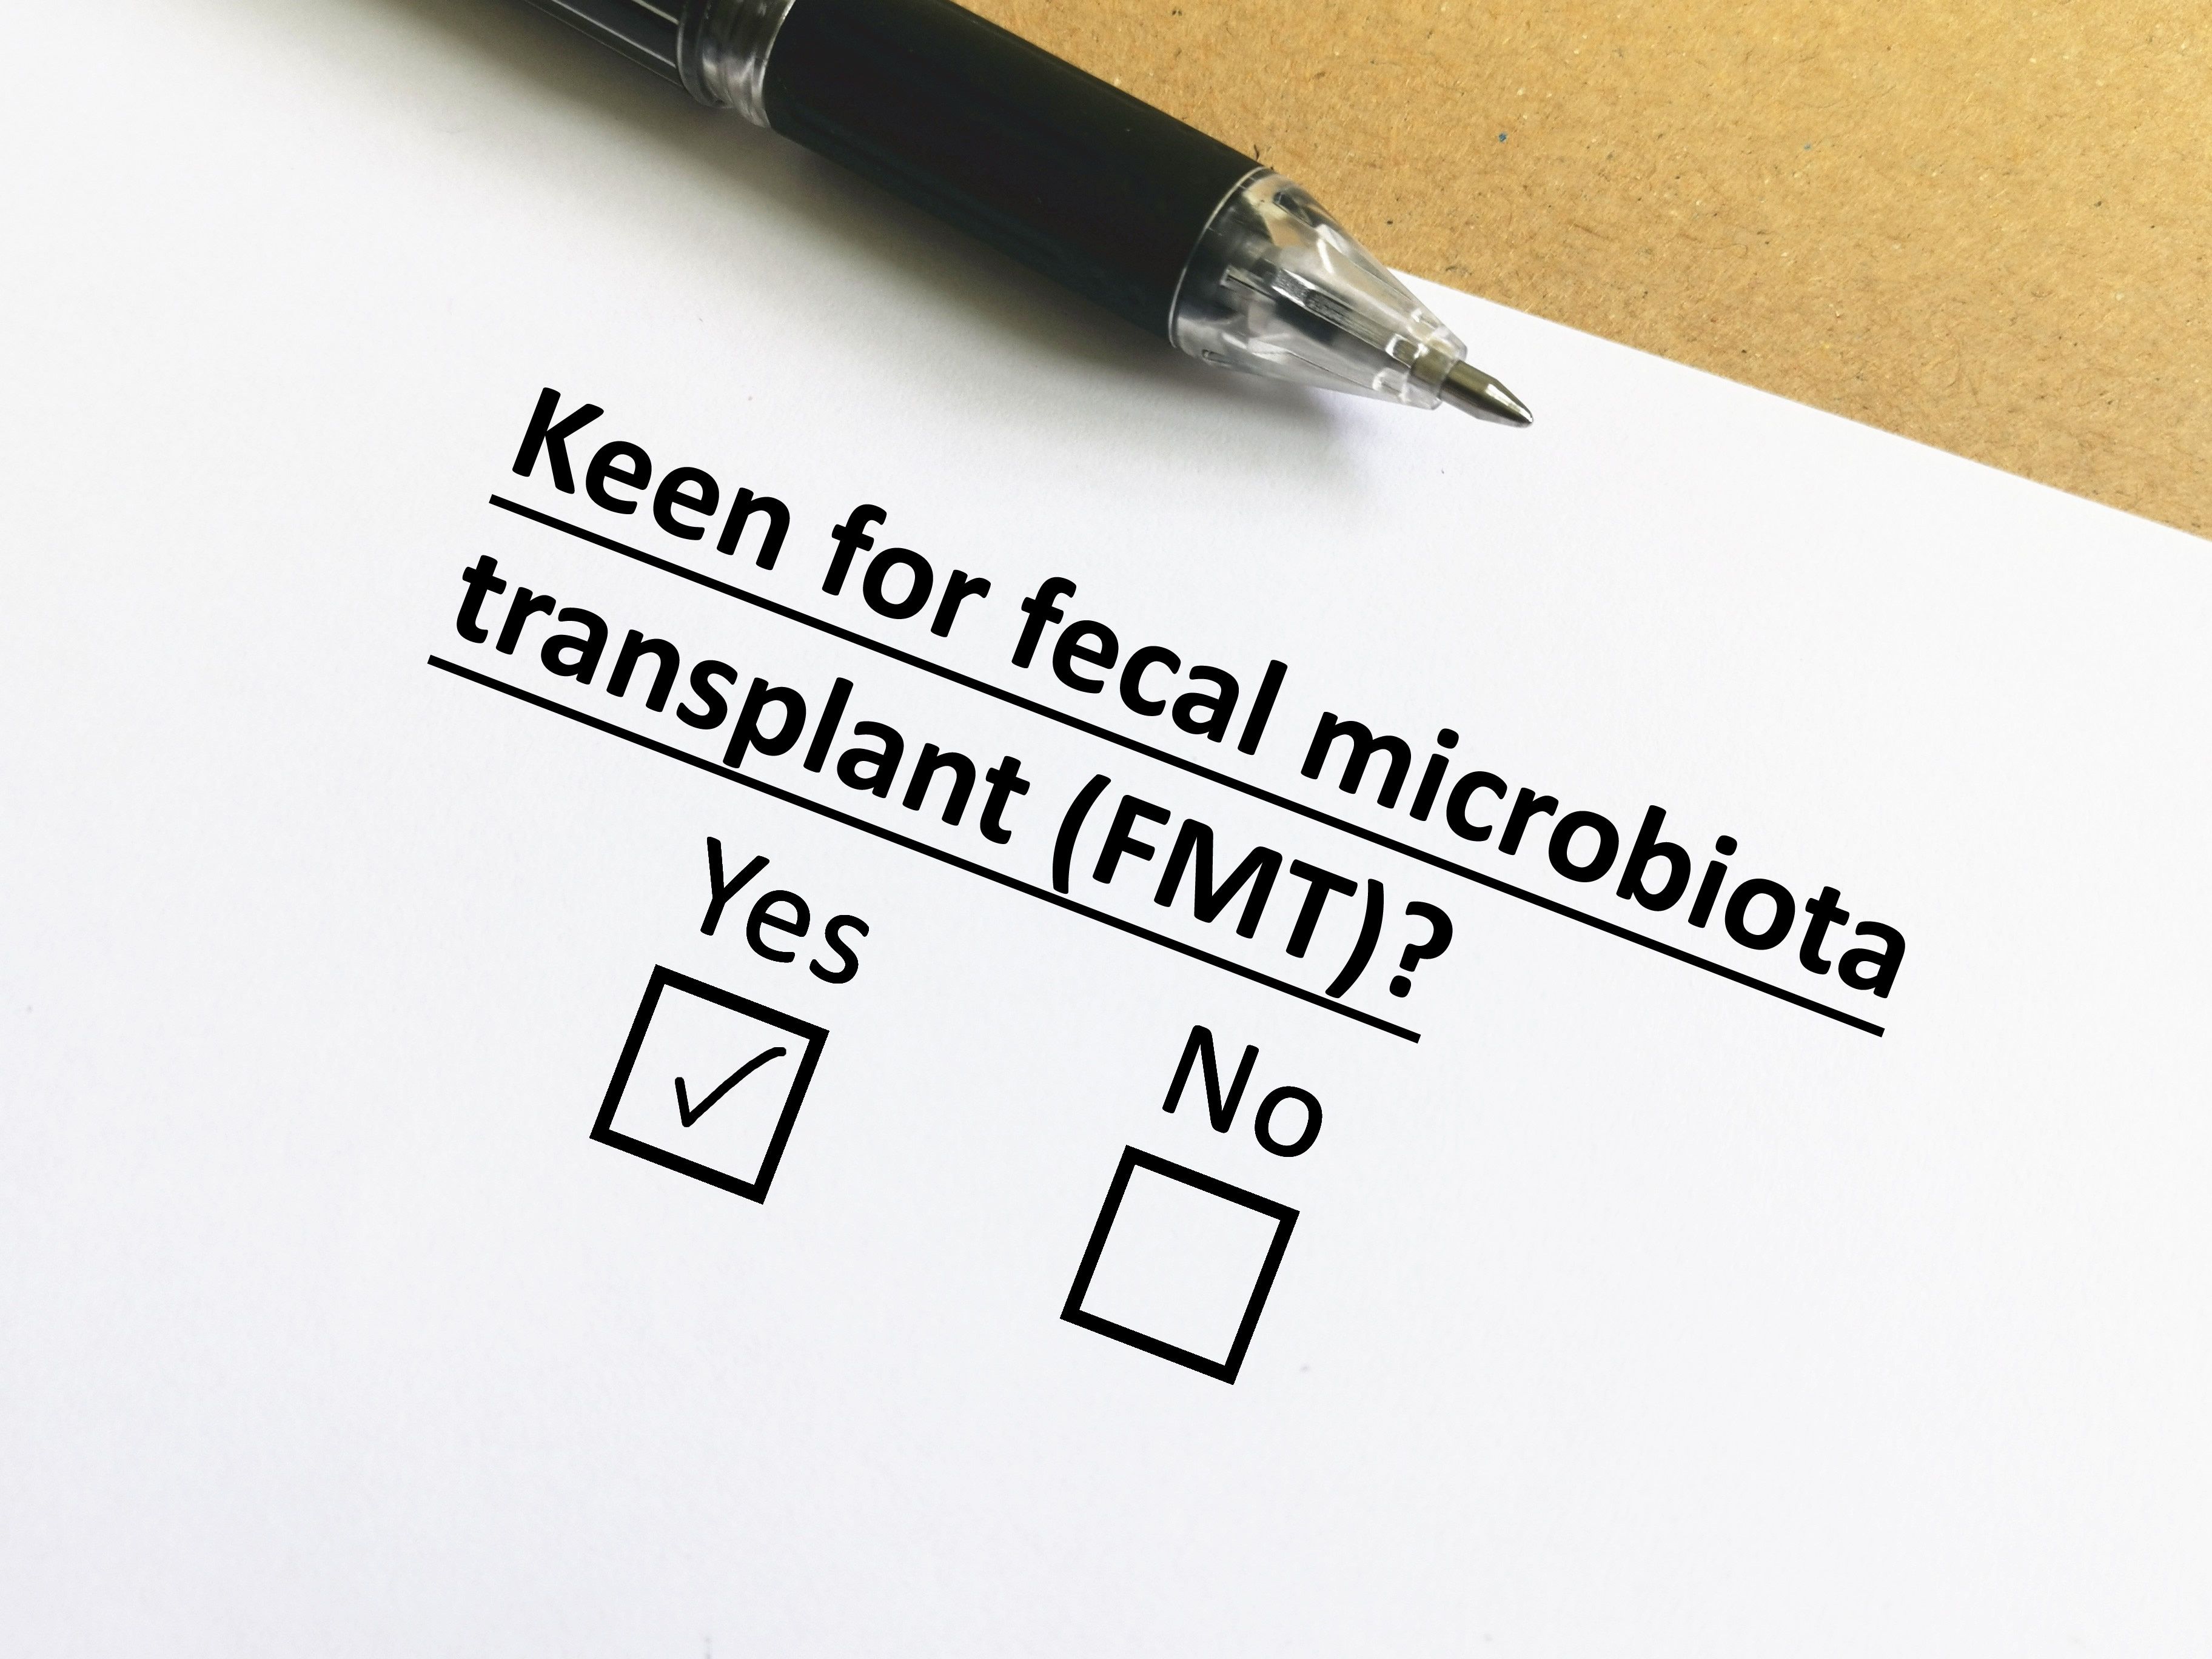 What Makes Fecal Microbiota Transplant an Effective C Difficile Cure?